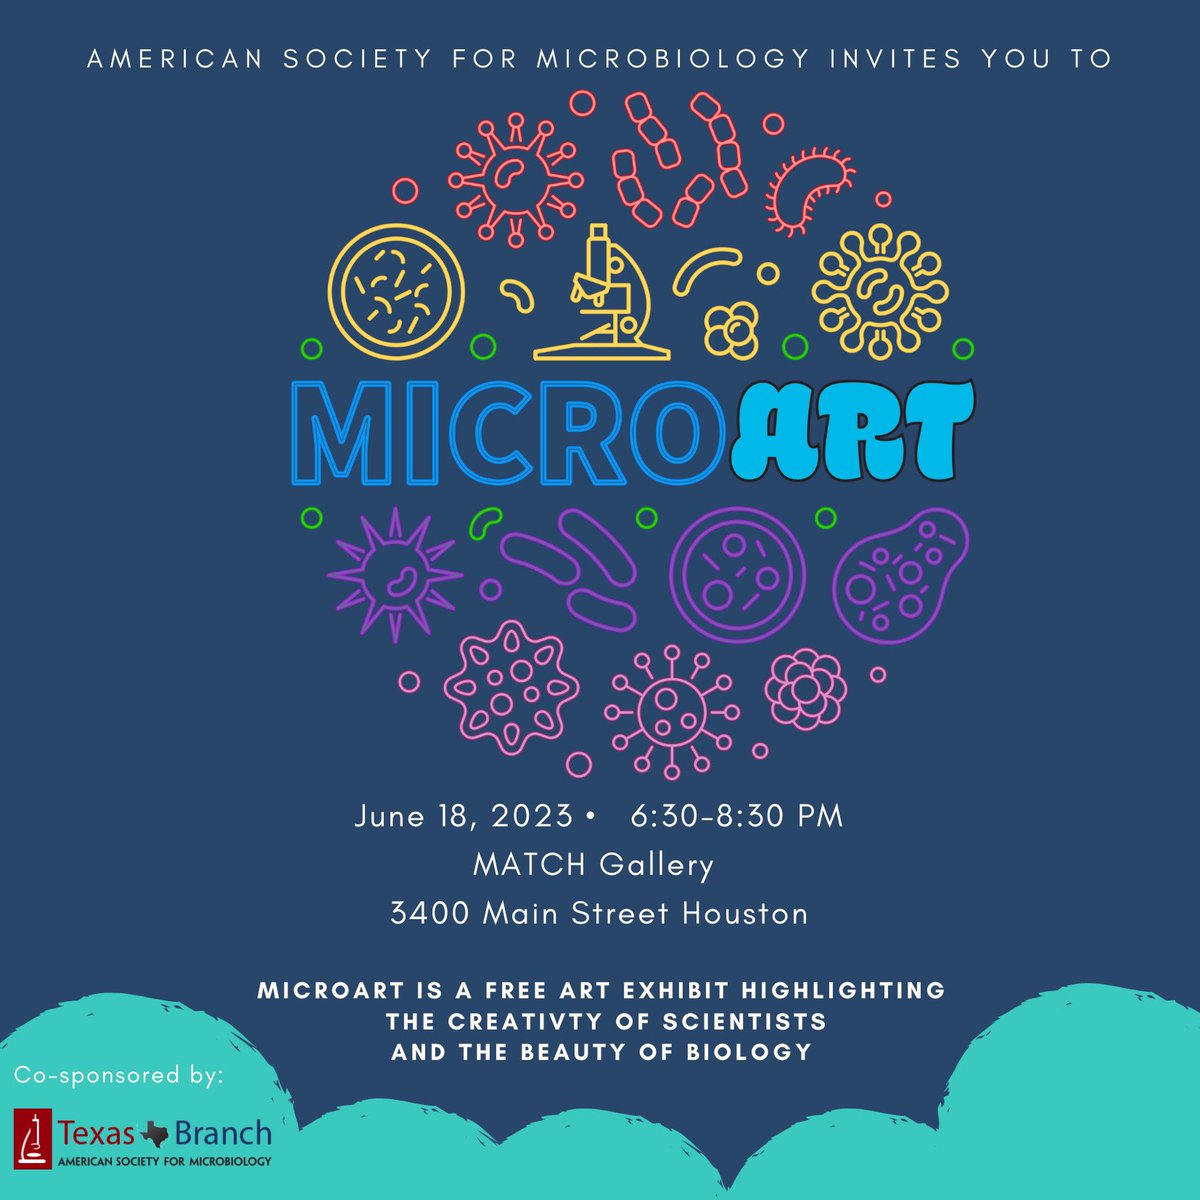 Happy to have volunteered for the MicroArt Exhibit today! So many inspired scientists dabbling in art, which I love to see! 🩷